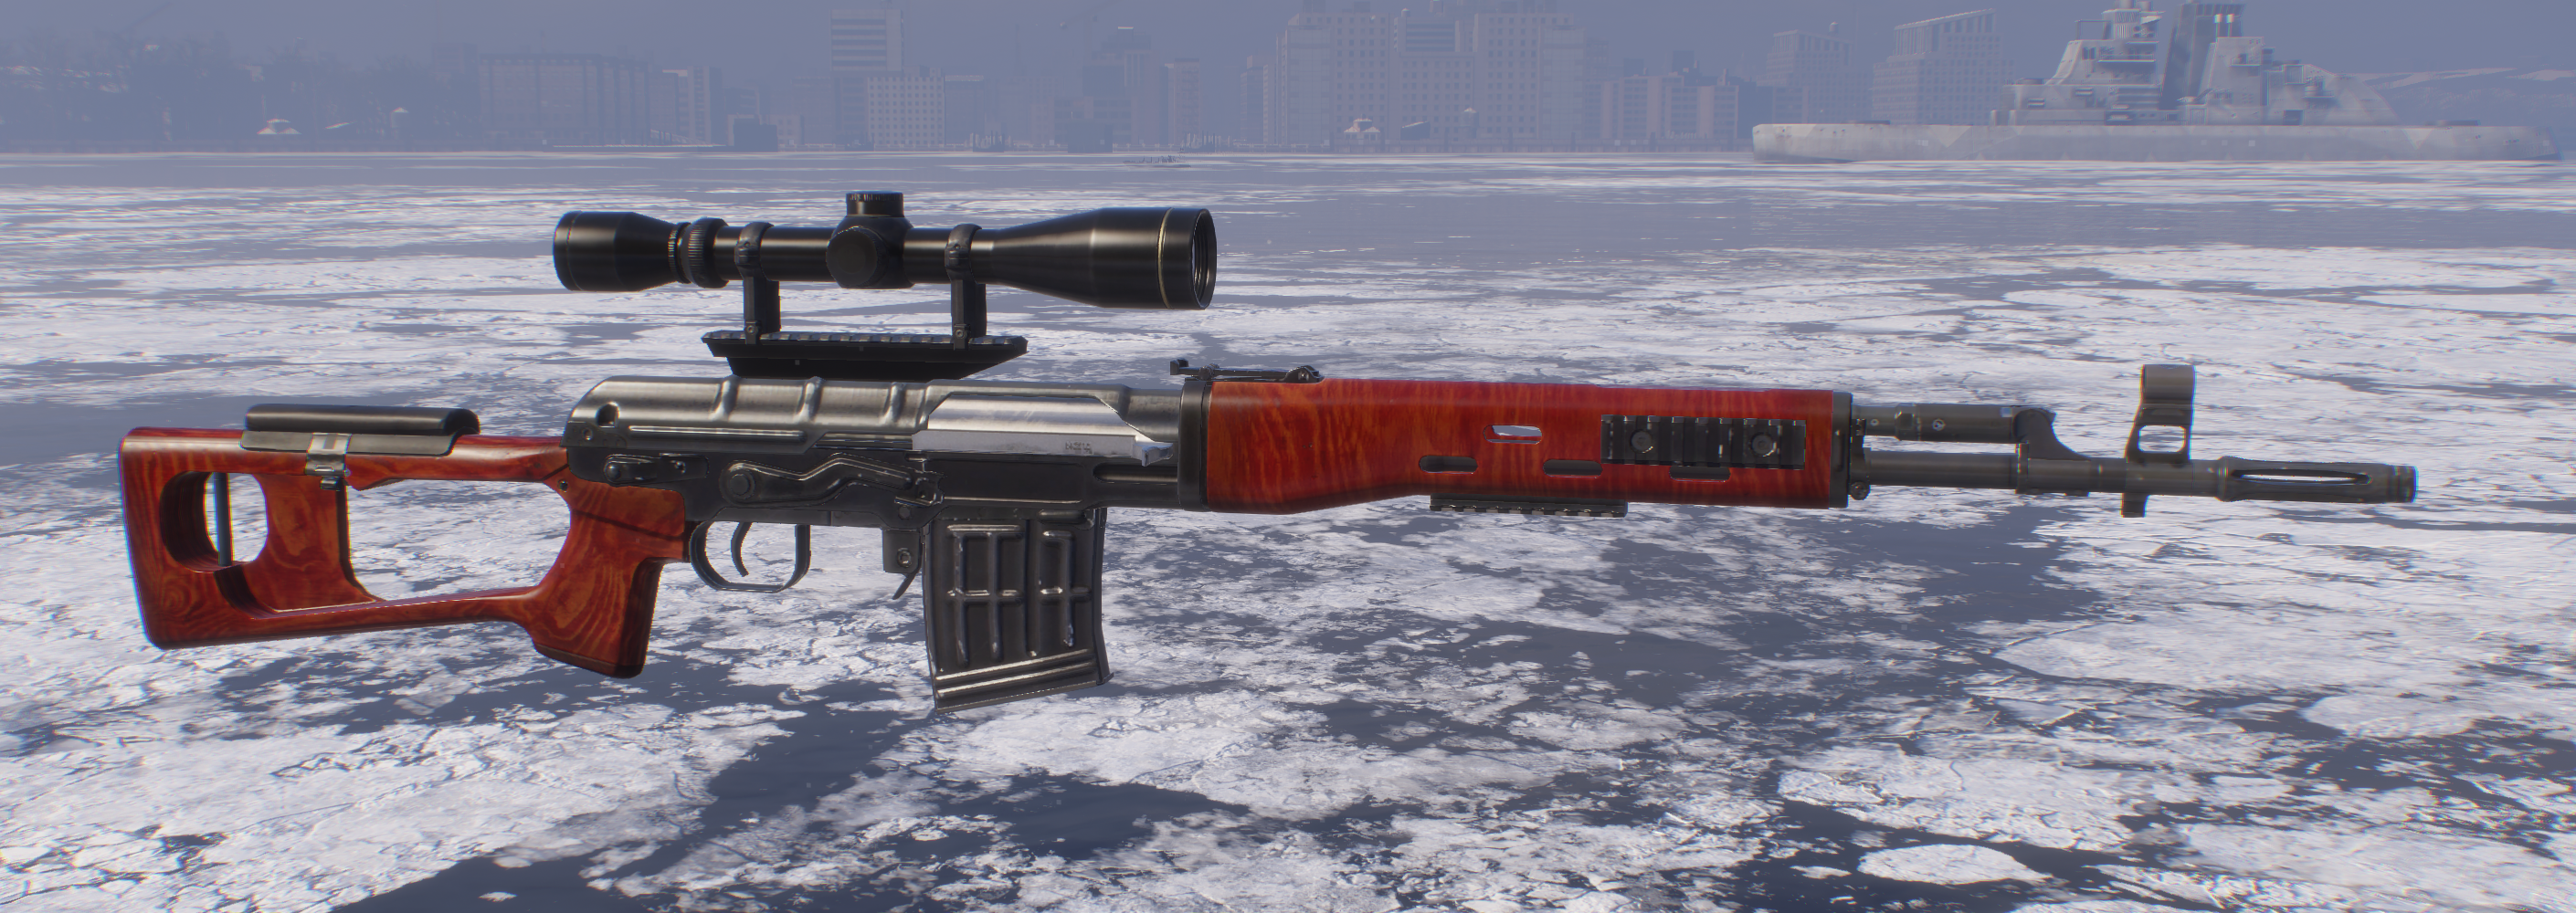 AK-47, The Division Wiki